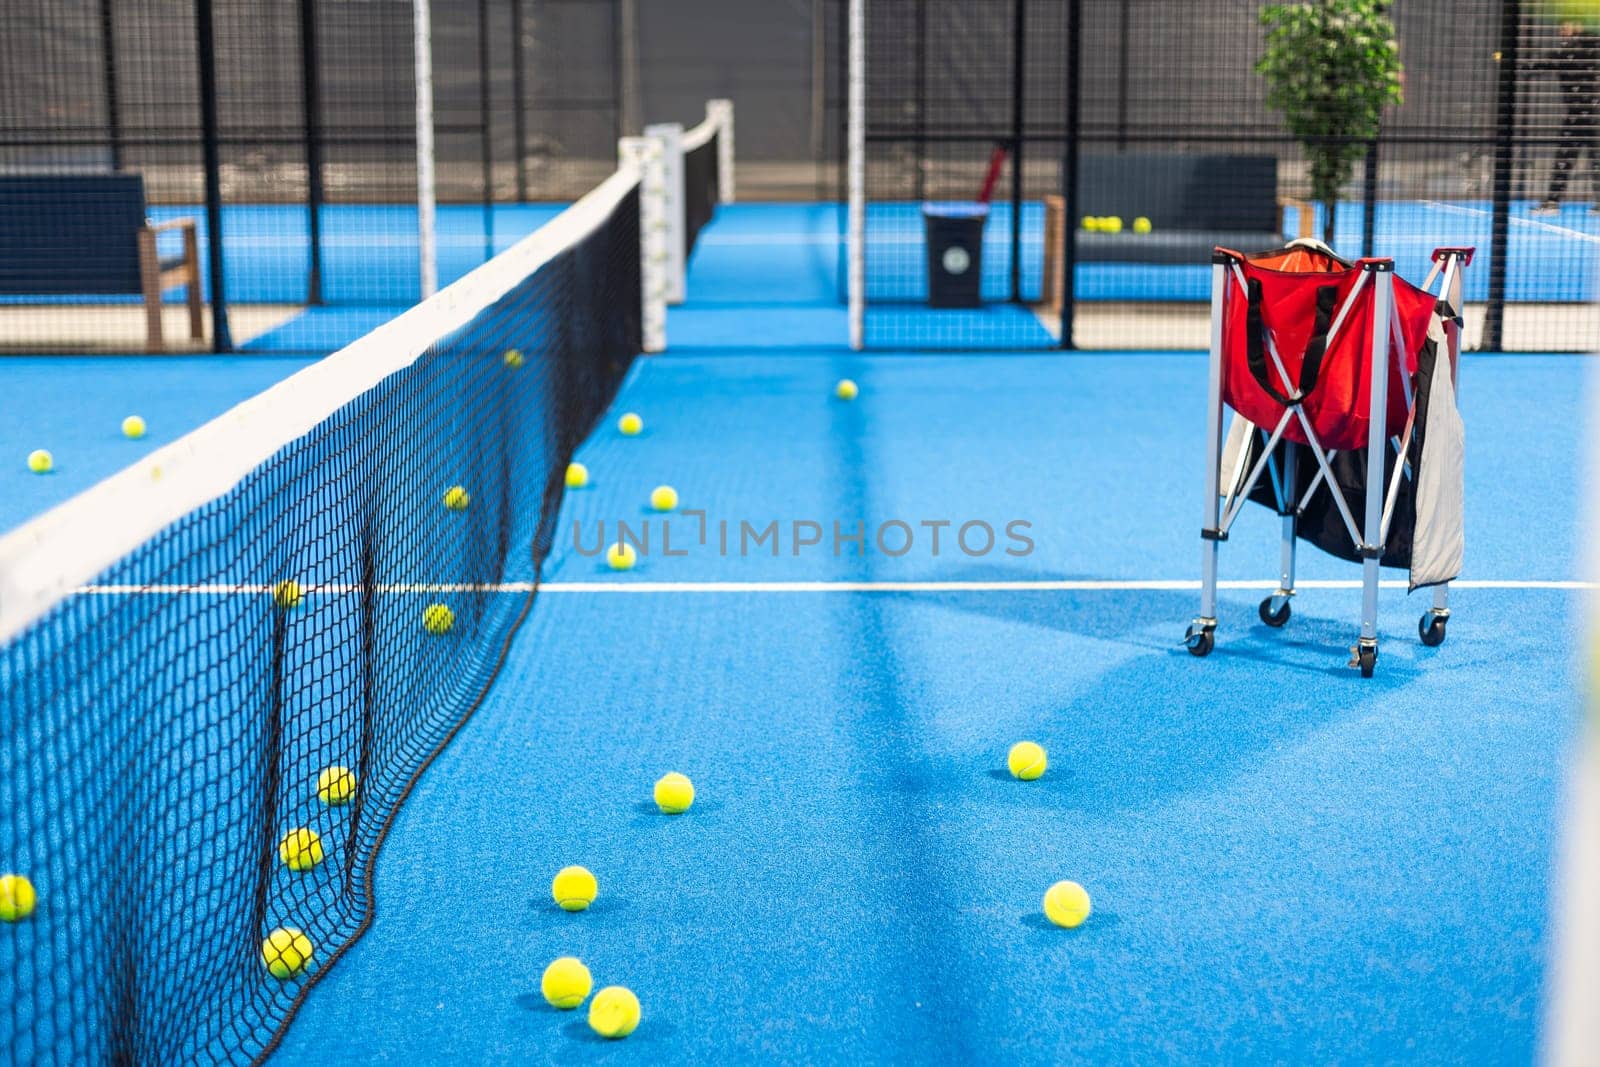 Tennis balls fall over on the tennis playground. High quality photo